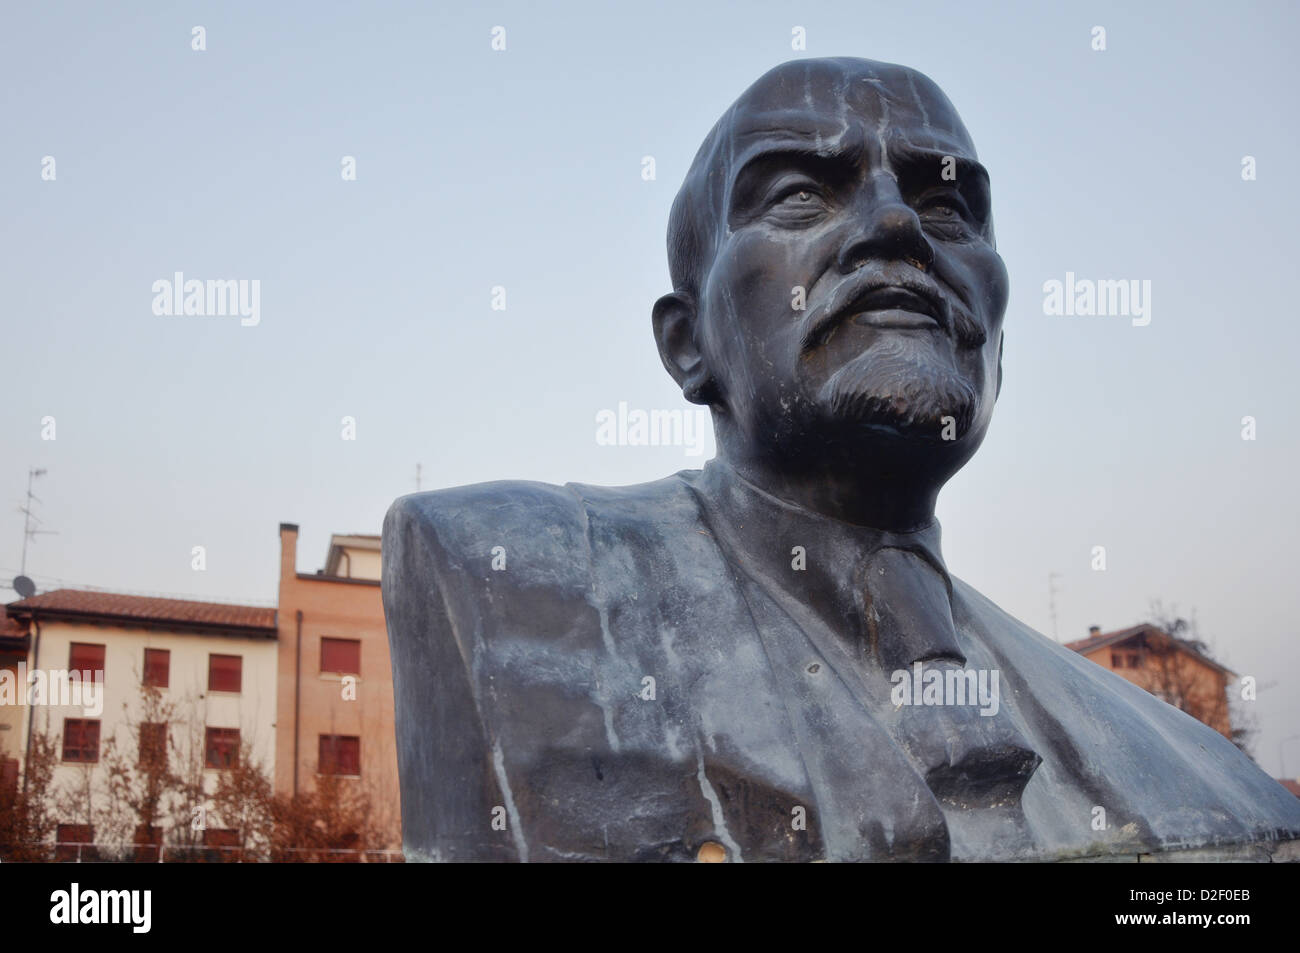 one of the very last monument to Vladimir Lenin in Western Europe stands in Cavriago, Italy Stock Photo